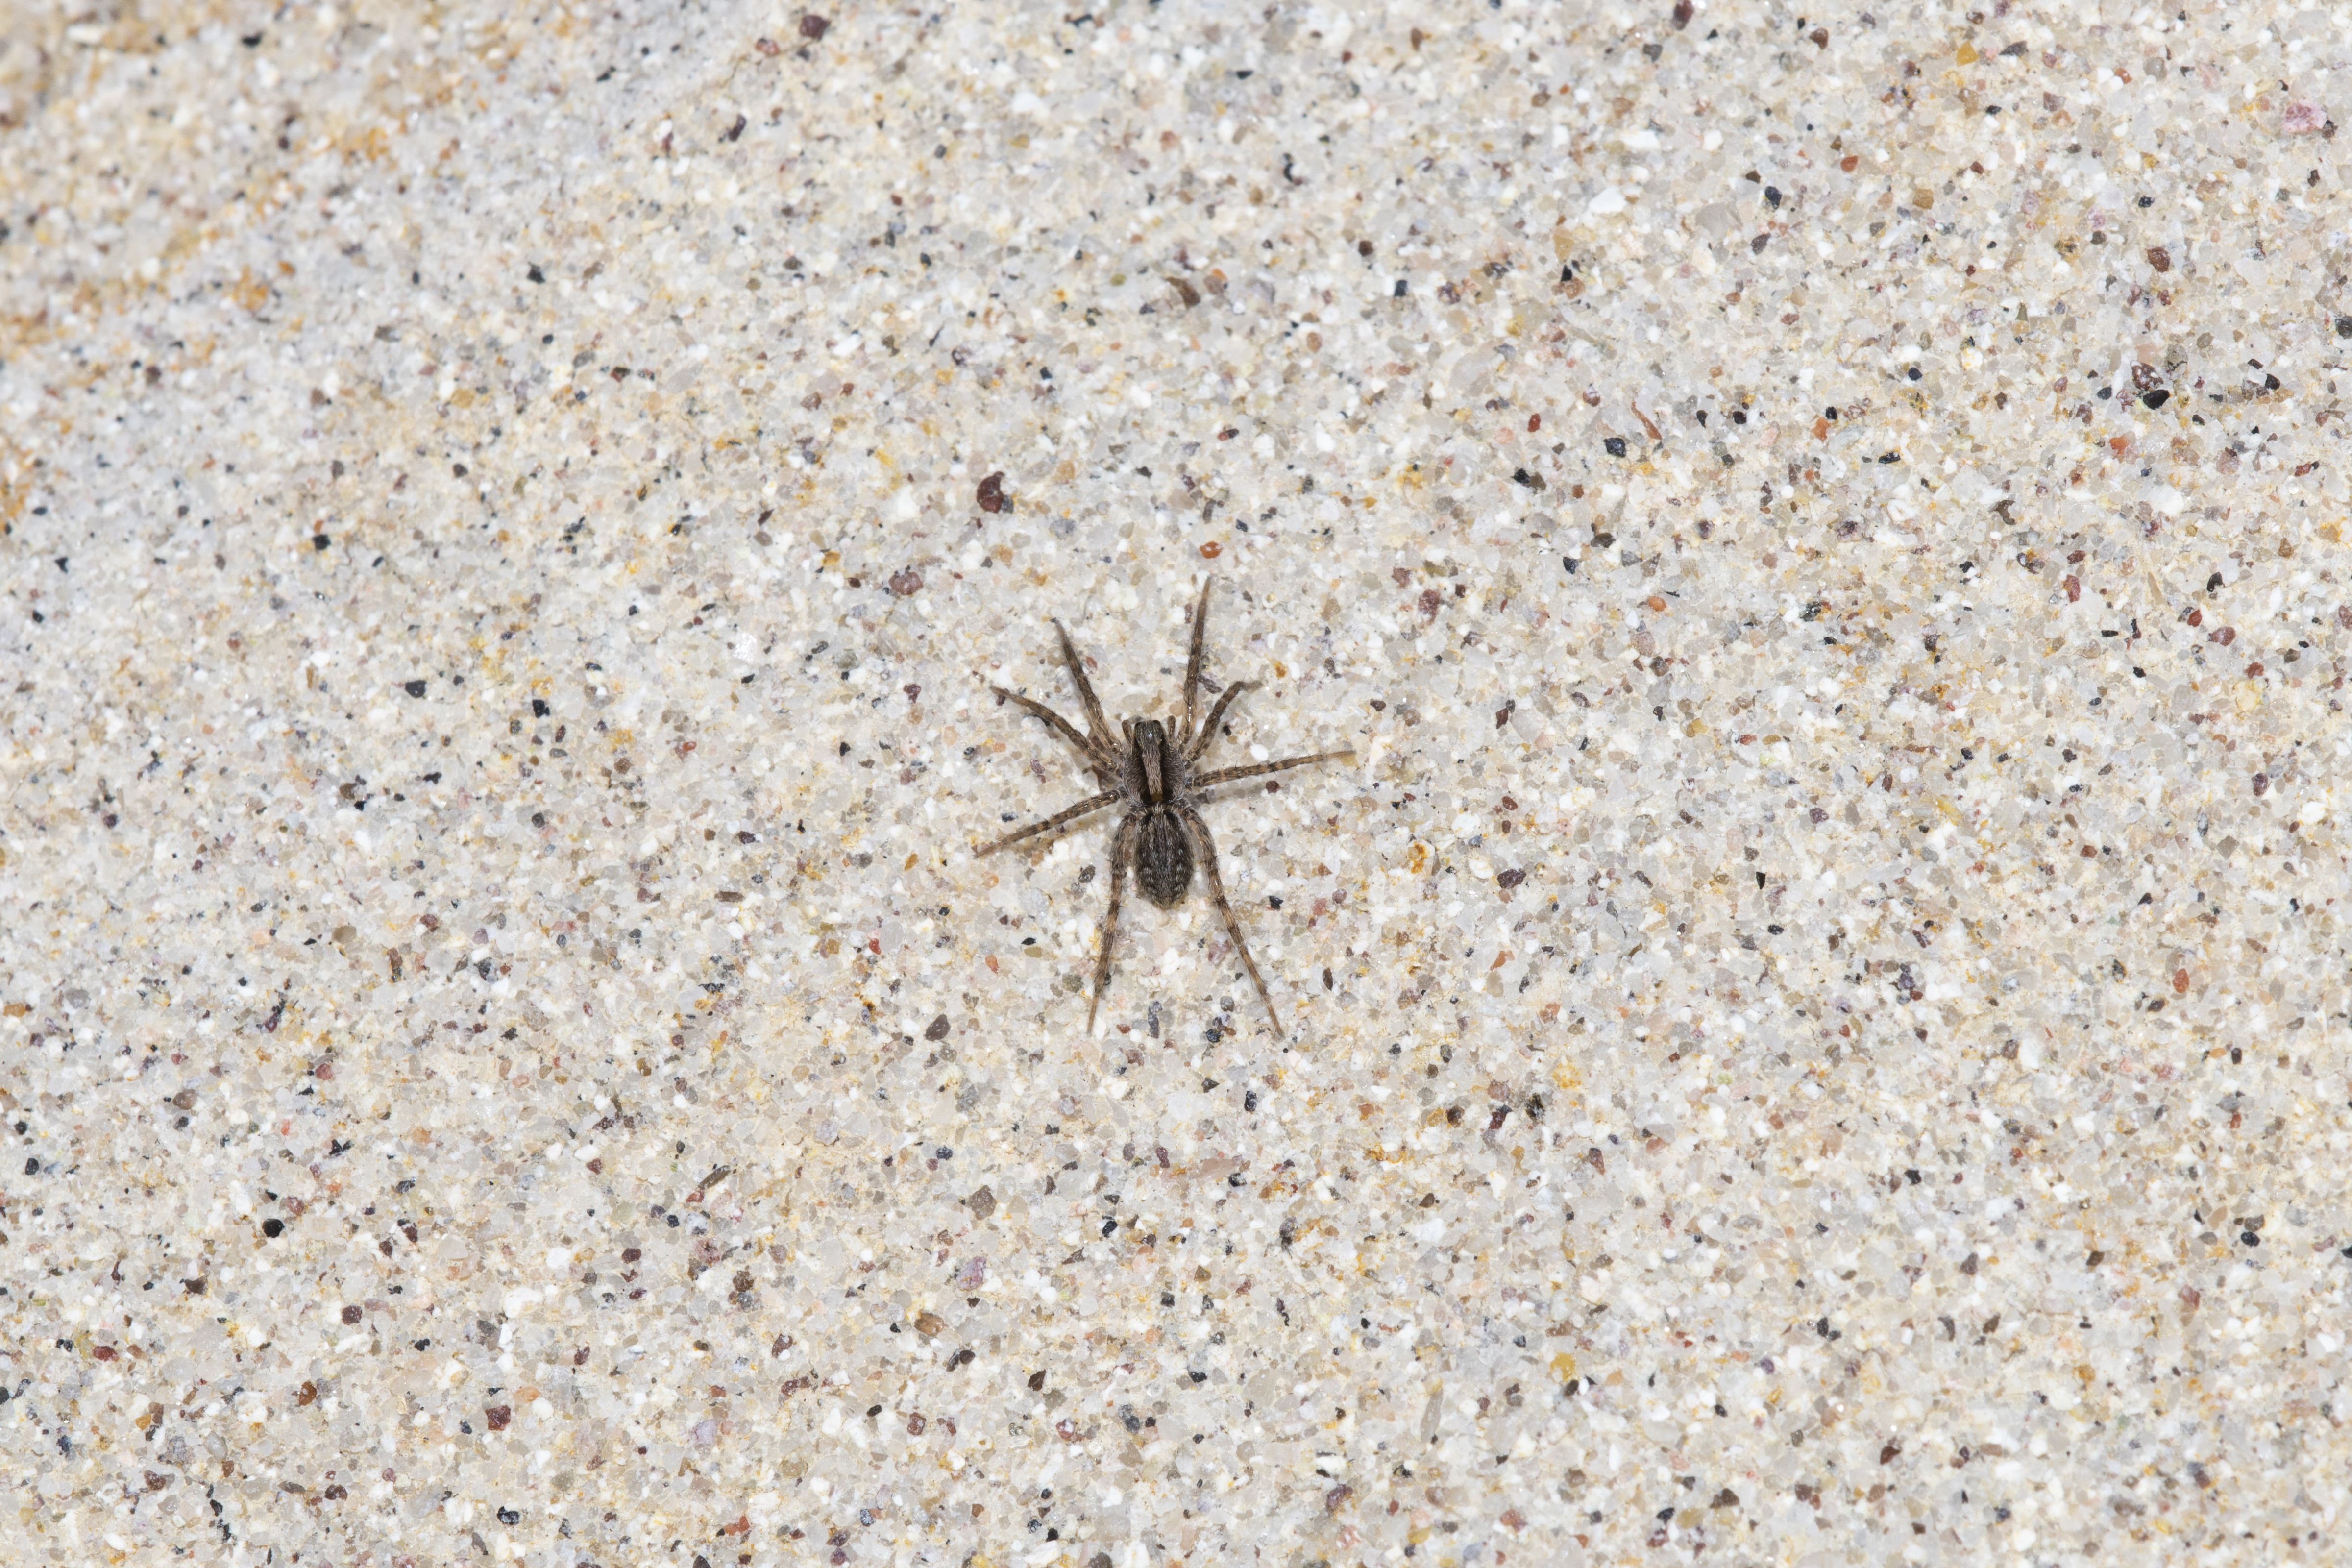 5 Common Biting Spiders - Green Pest Services